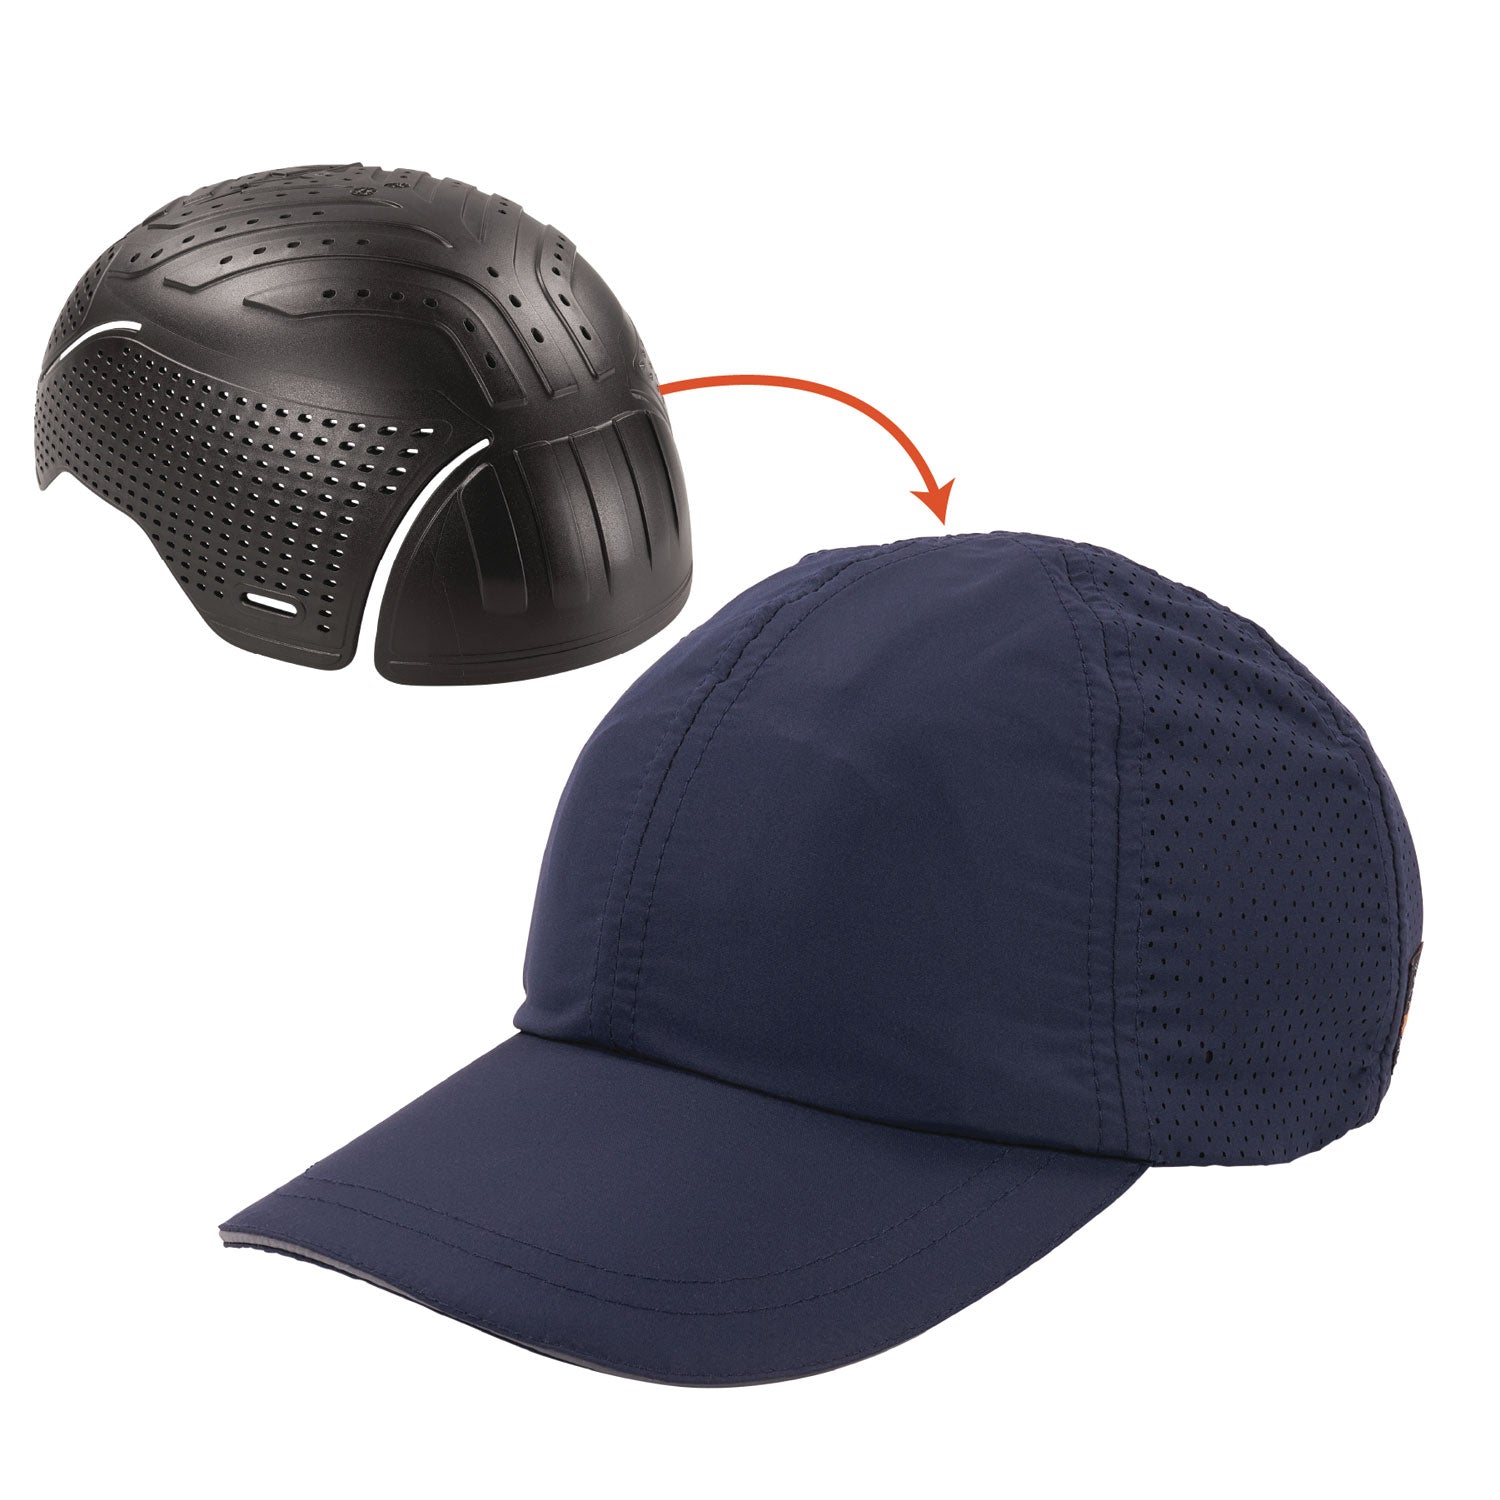 skullerz-8947-lightweight-baseball-hat-and-bump-cap-insert-x-small-small-navy-ships-in-1-3-business-days_ego23453 - 1